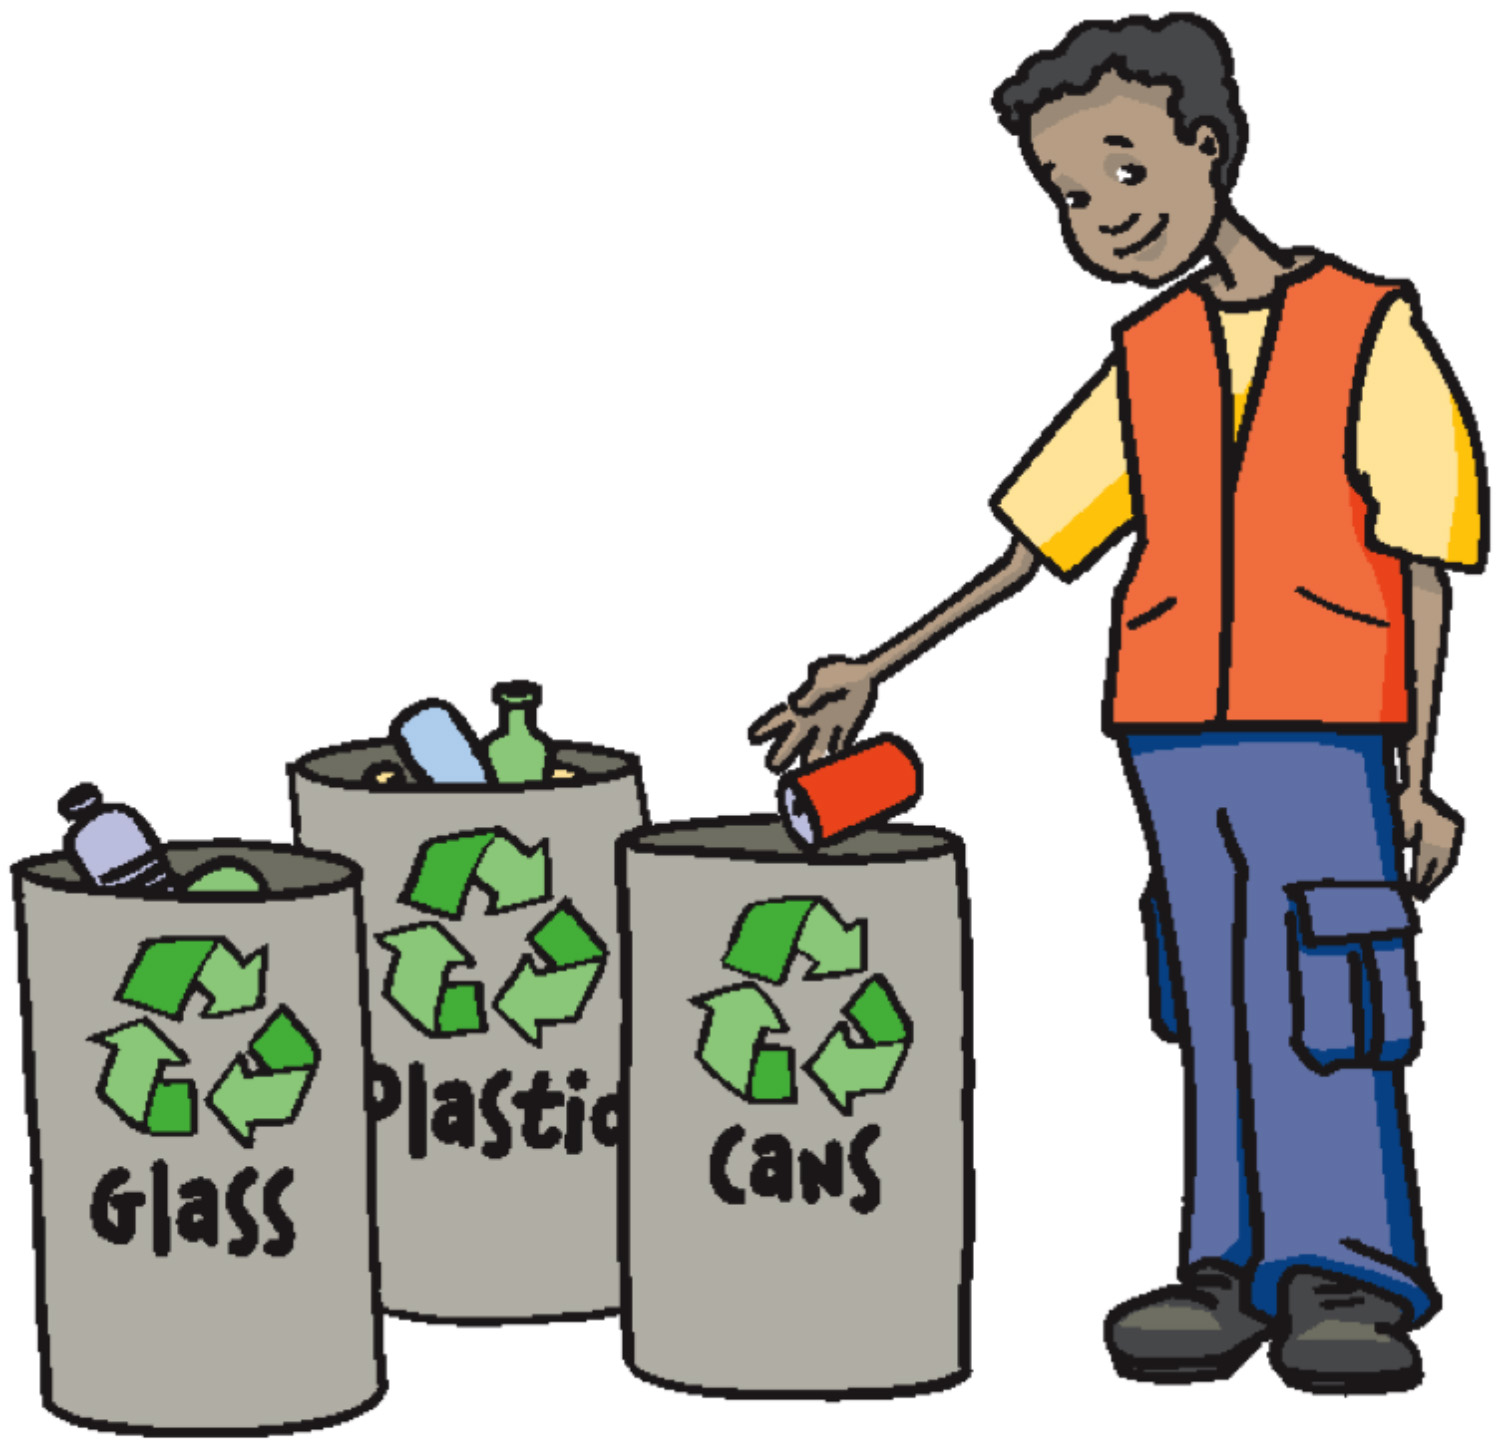 garbage clipart reuse